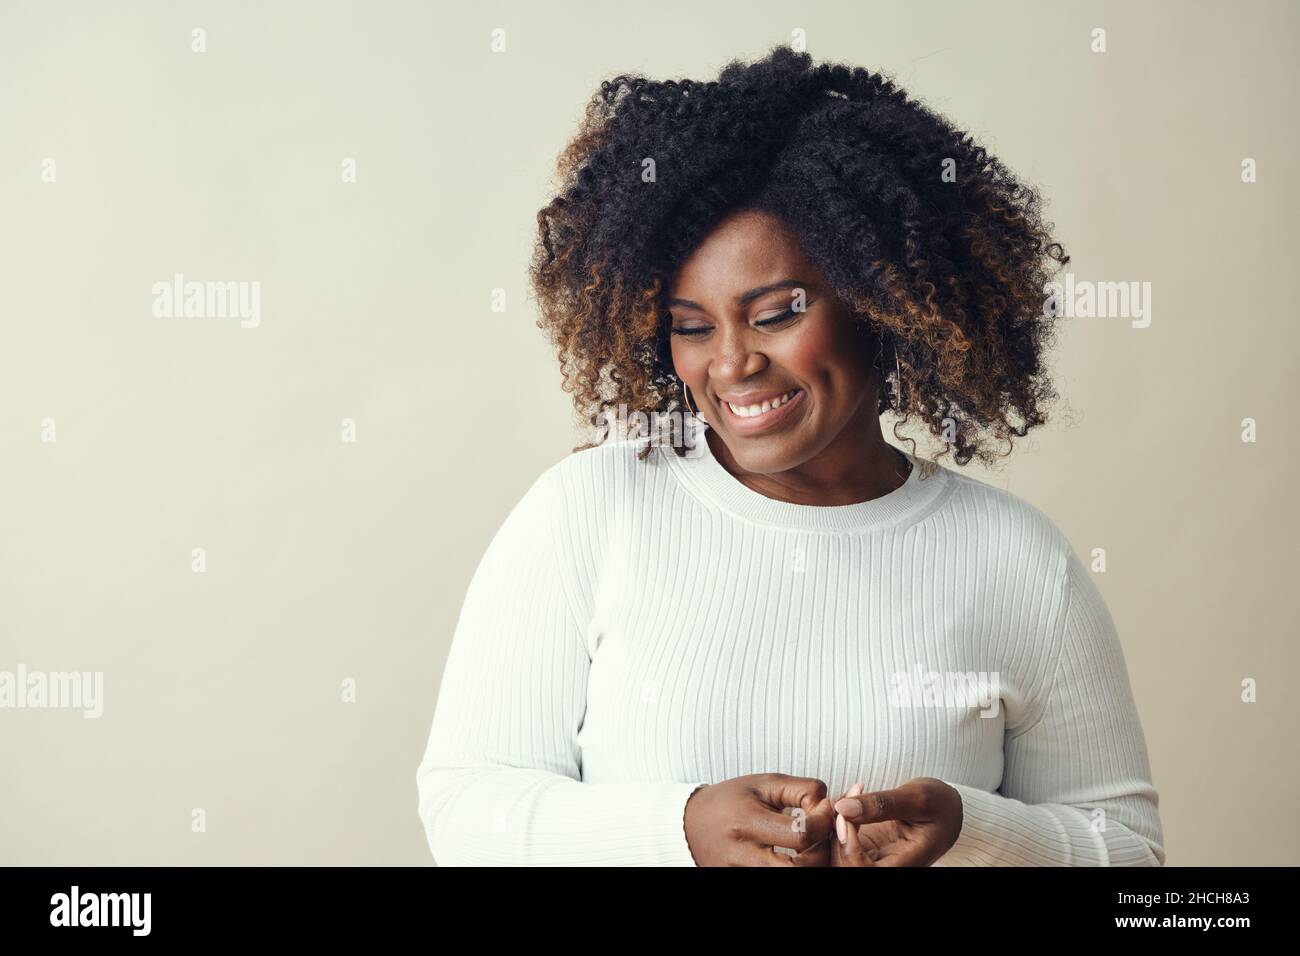 Smiling Afro woman with brown highlights on curly hair looking down against  white background Stock Photo - Alamy